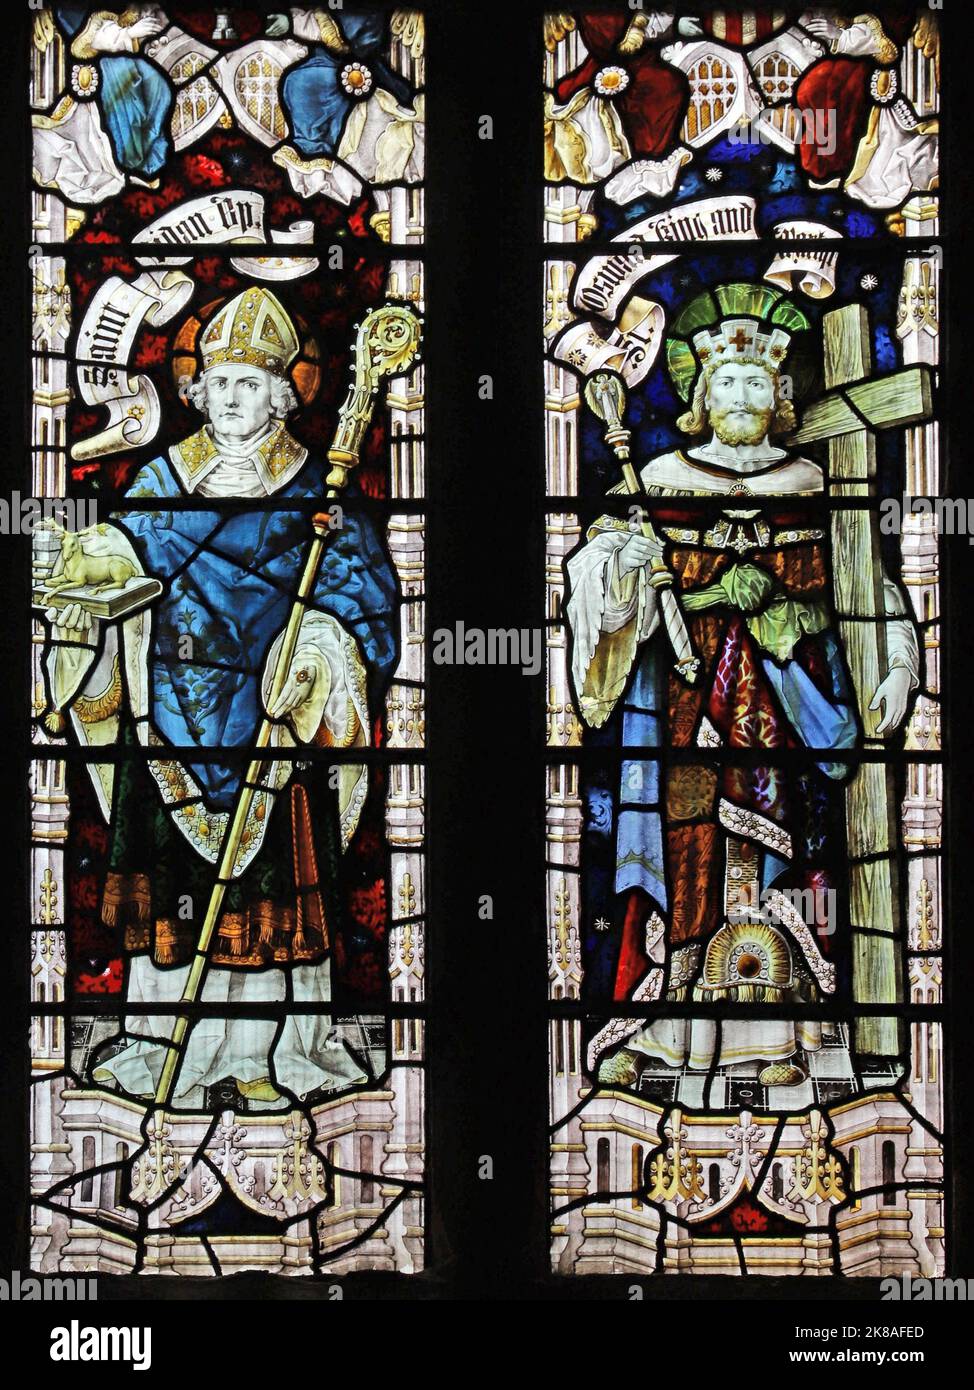 Stained glass window by Percy Bacon & Brothers depicting Saints Aidan of Lindisfarne & Oswald, St Chad's Church, Bensham, Gateshead Stock Photo